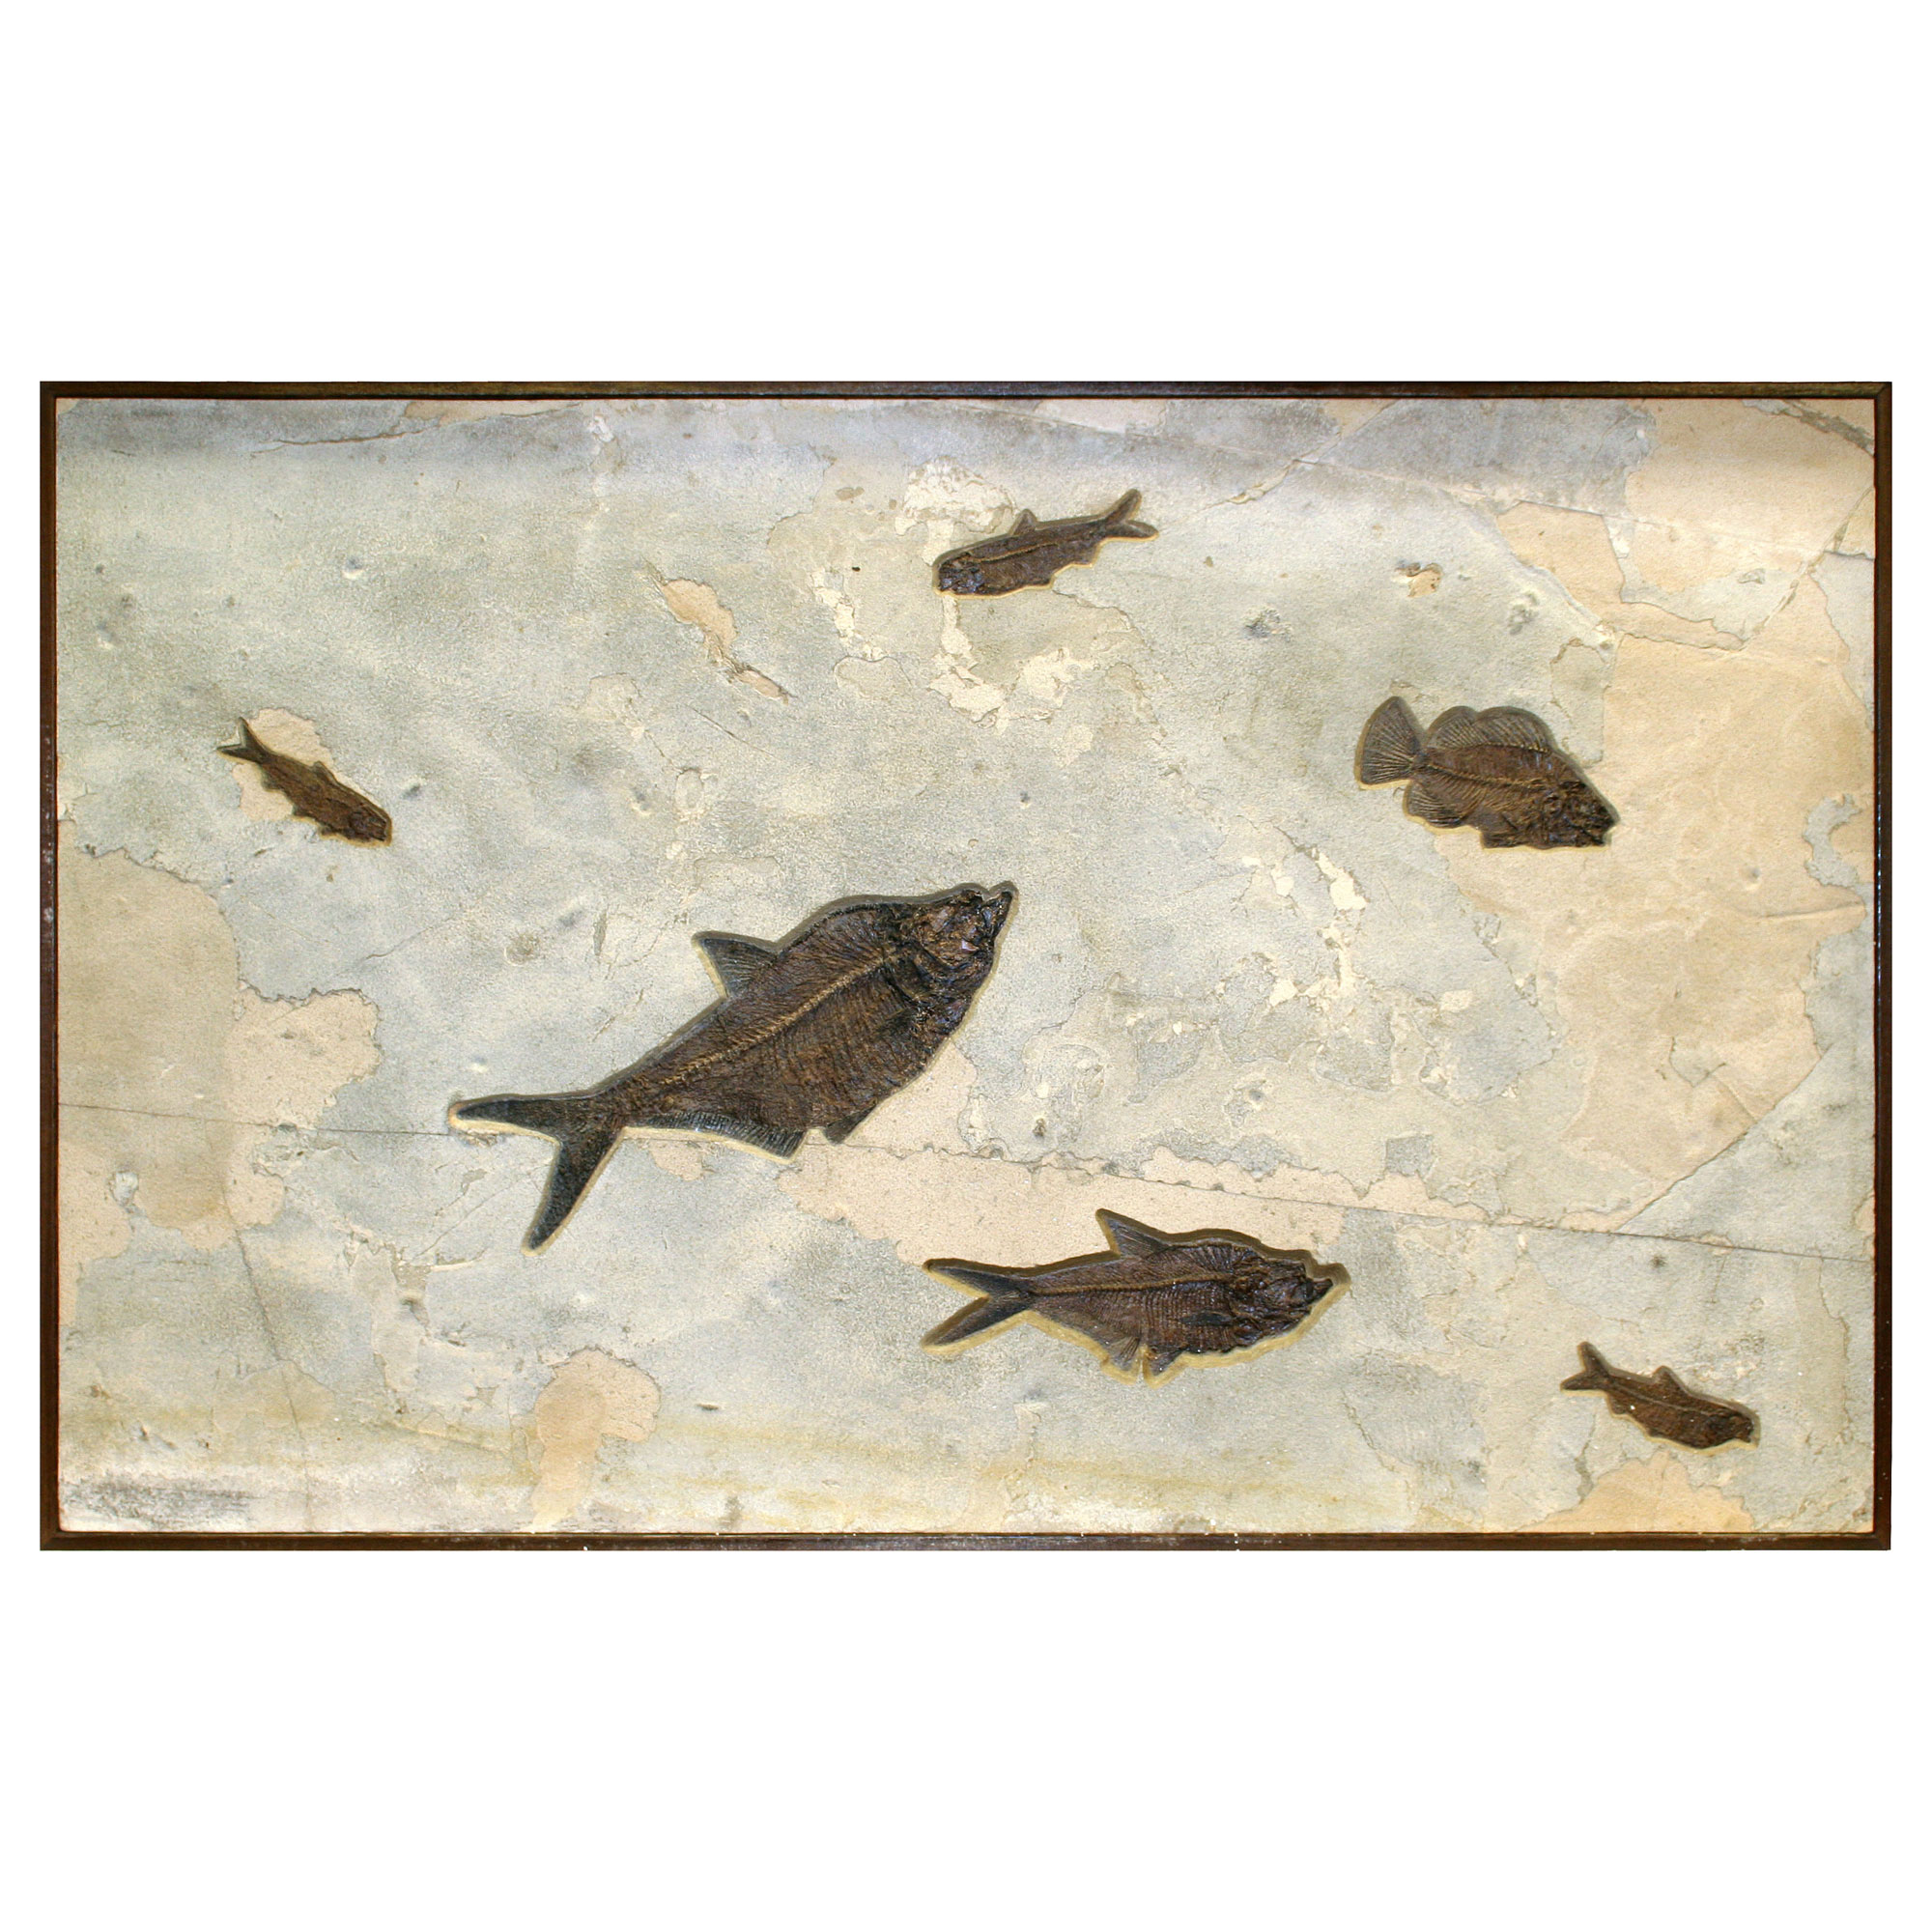 Fossil Collector Mural Q070725003cm